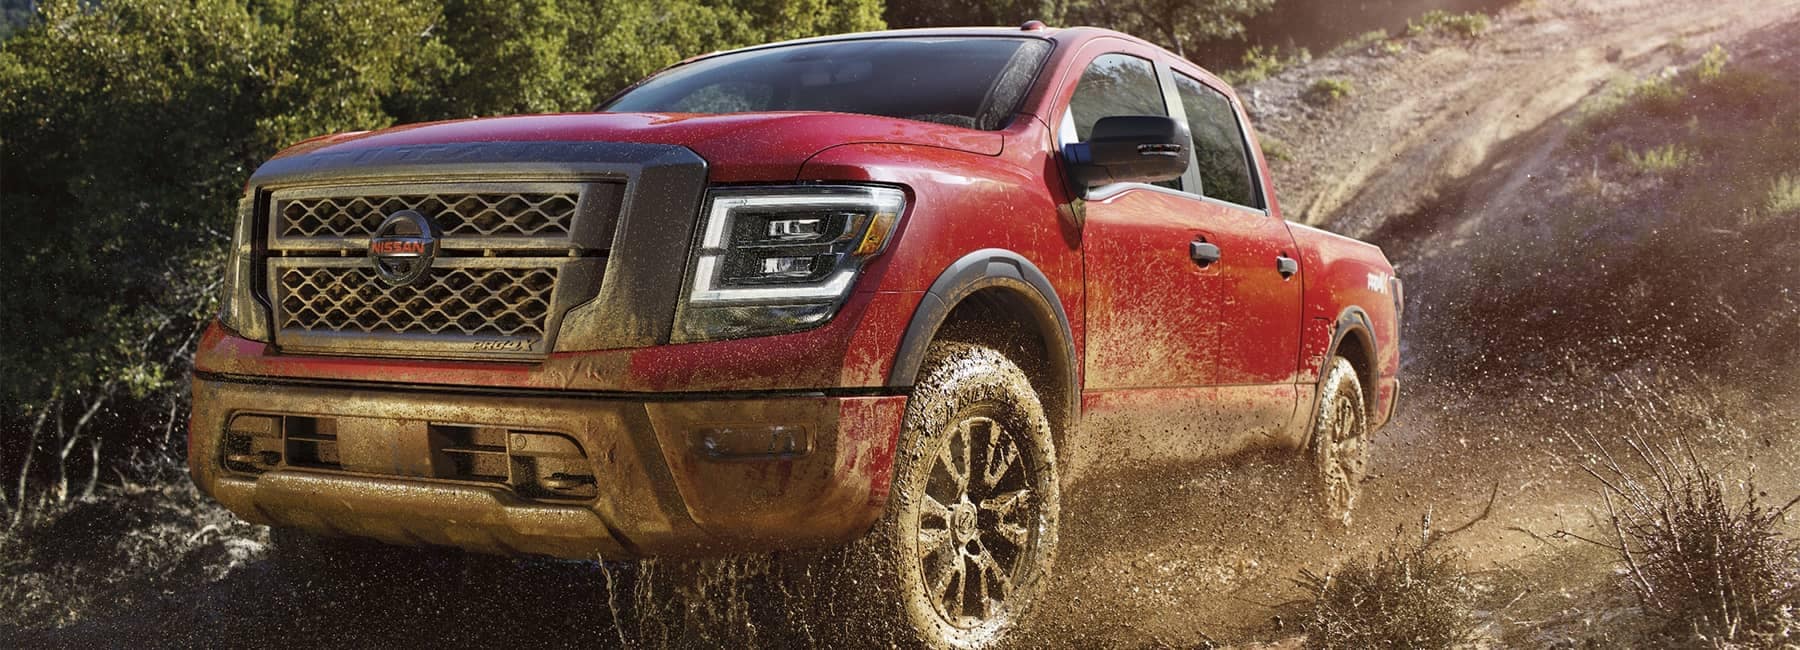 2021 Red Nissan Titan Truck off roading in dirt